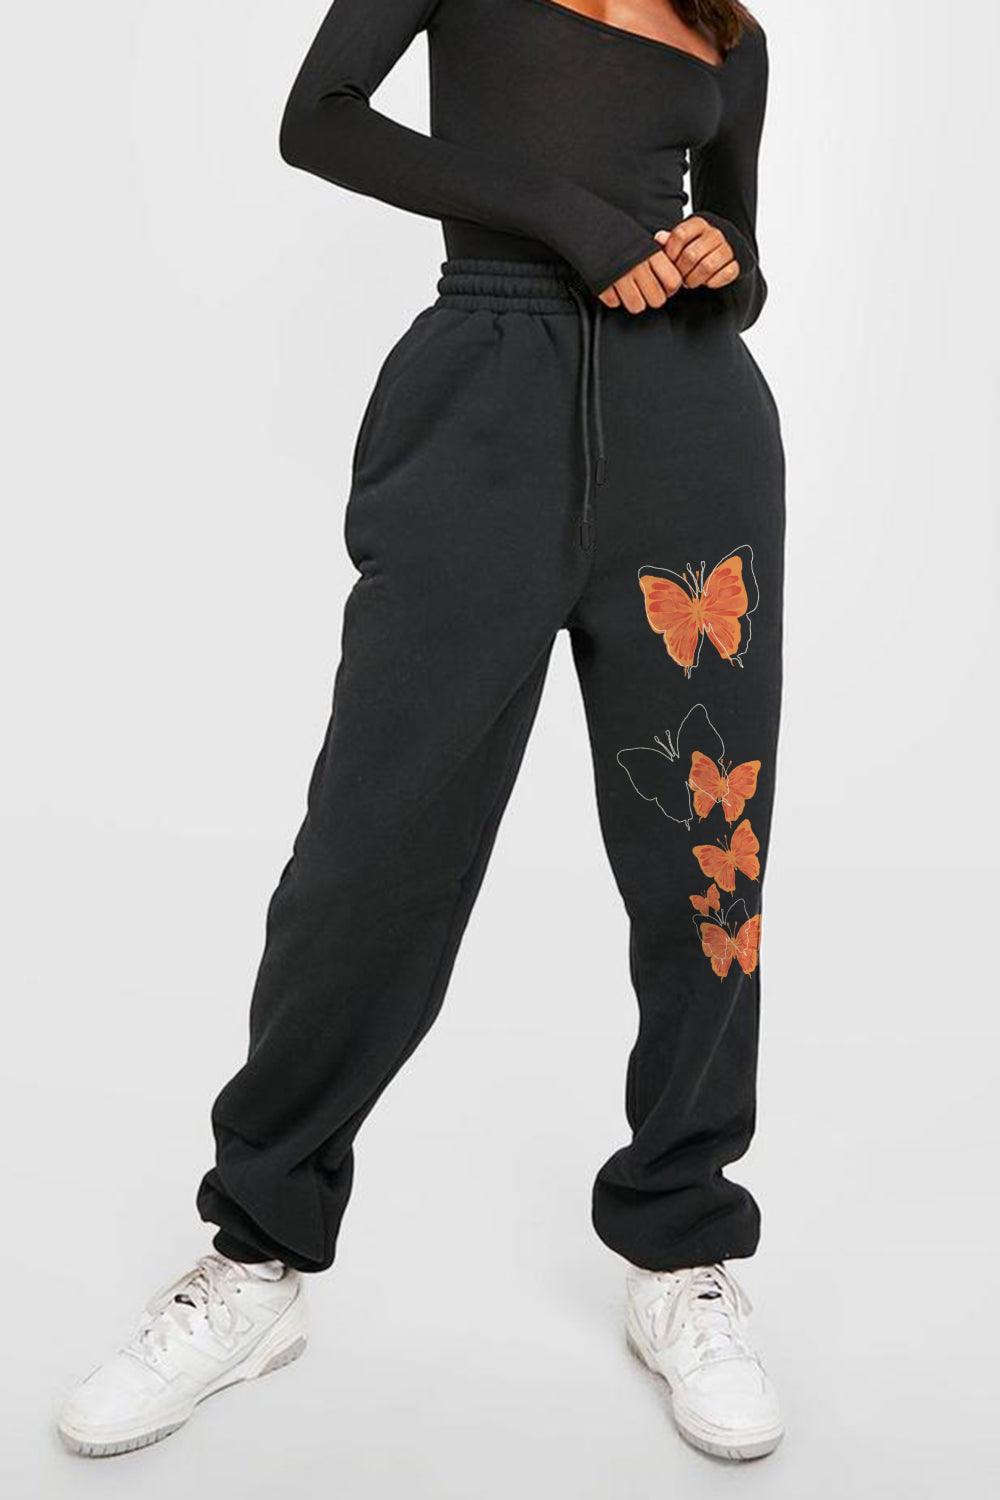 Simply Love Full Size Butterfly Graphic Sweatpants - Vesteeto